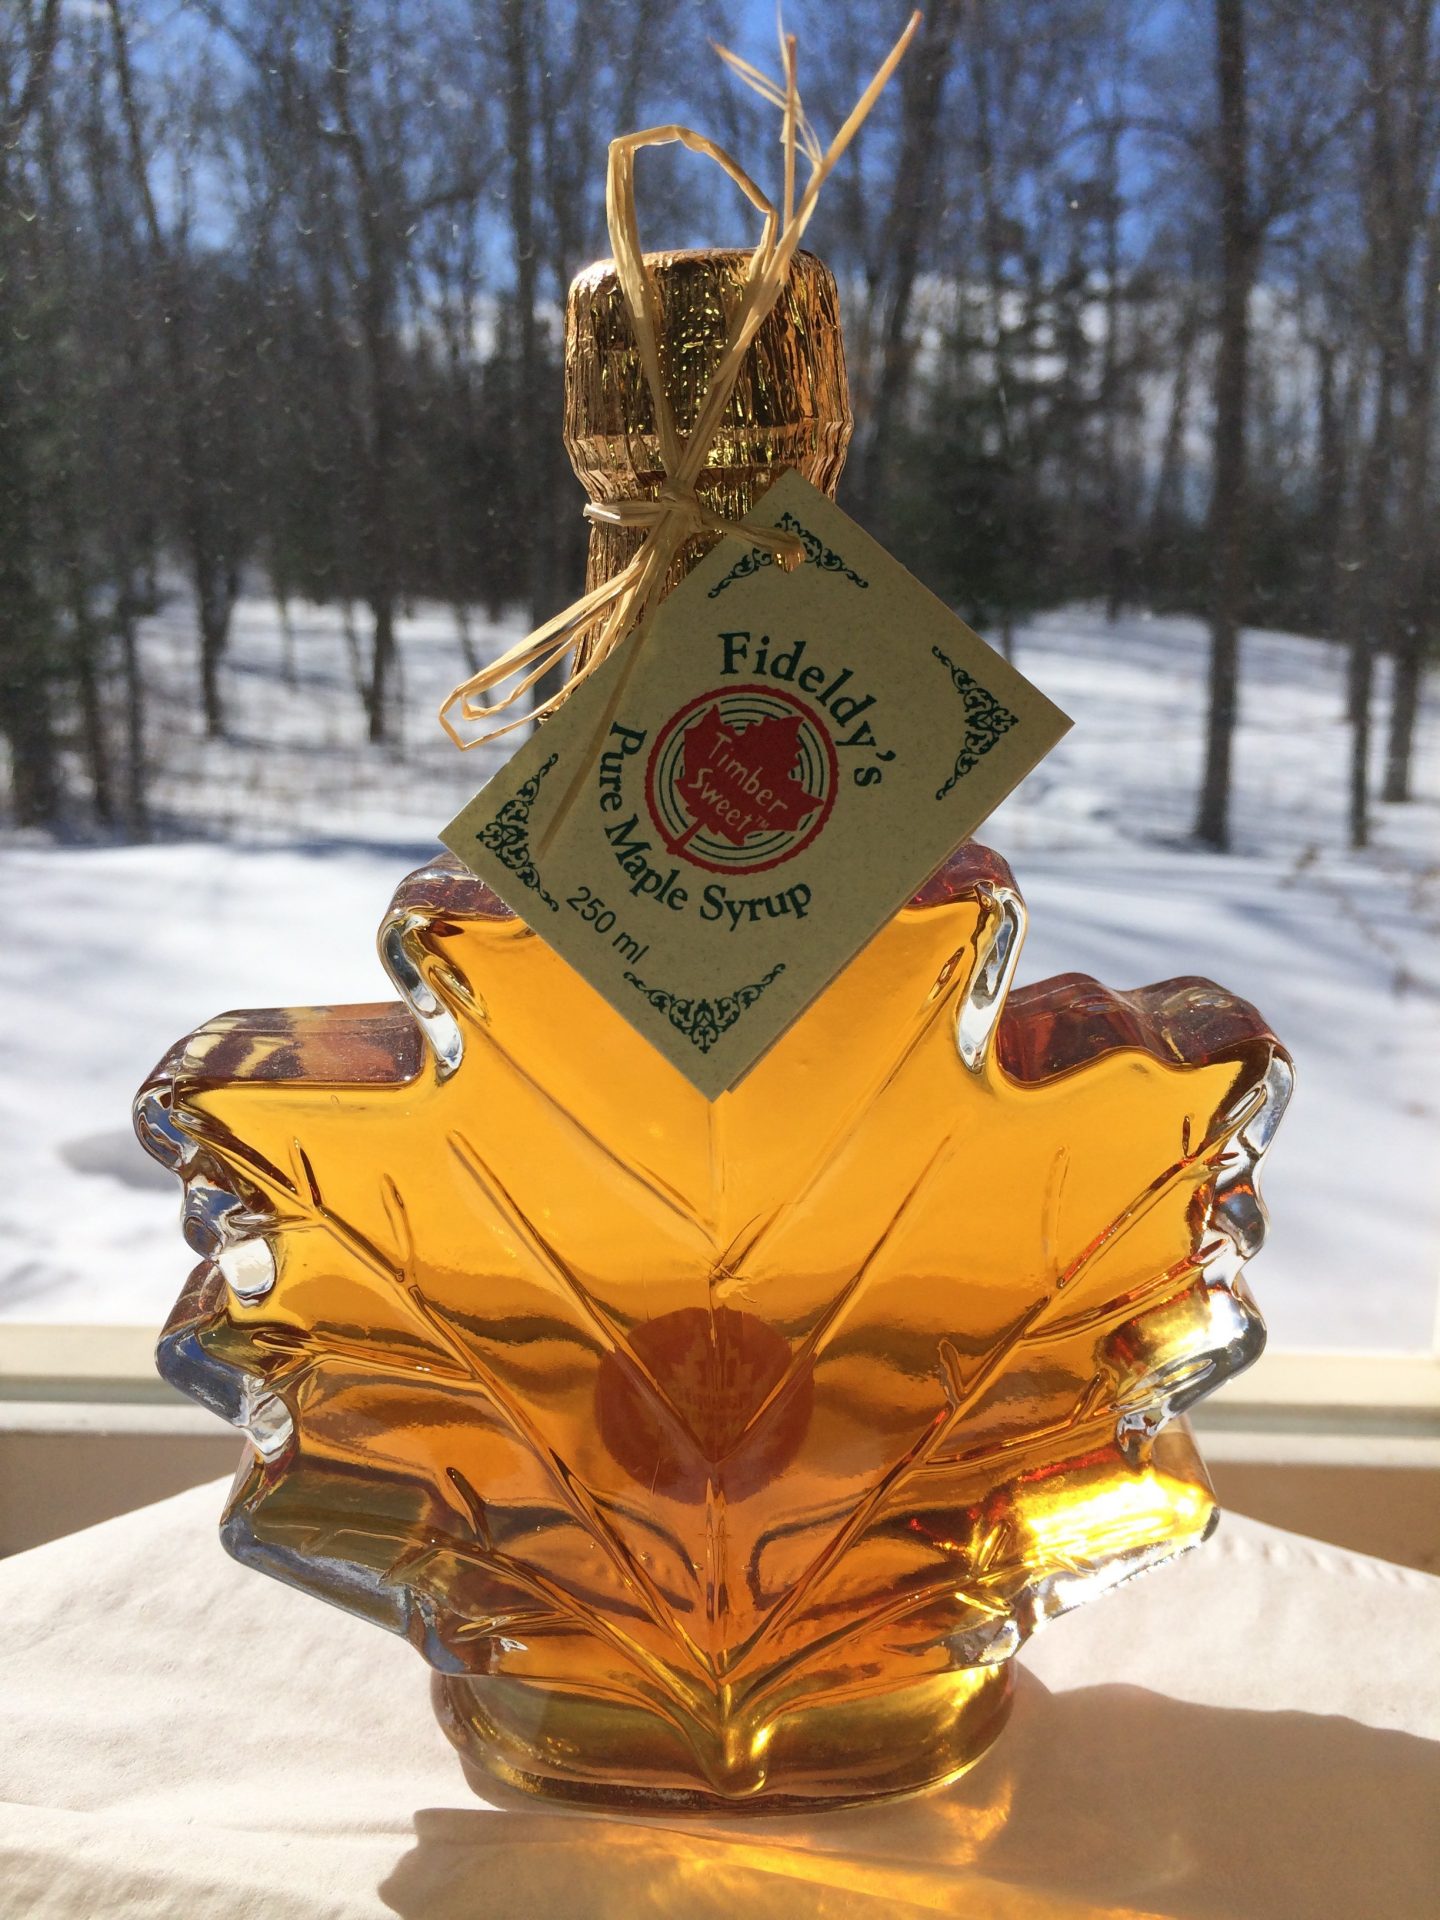 2019 01 11 Submitted TimberSweet Maple Syrup